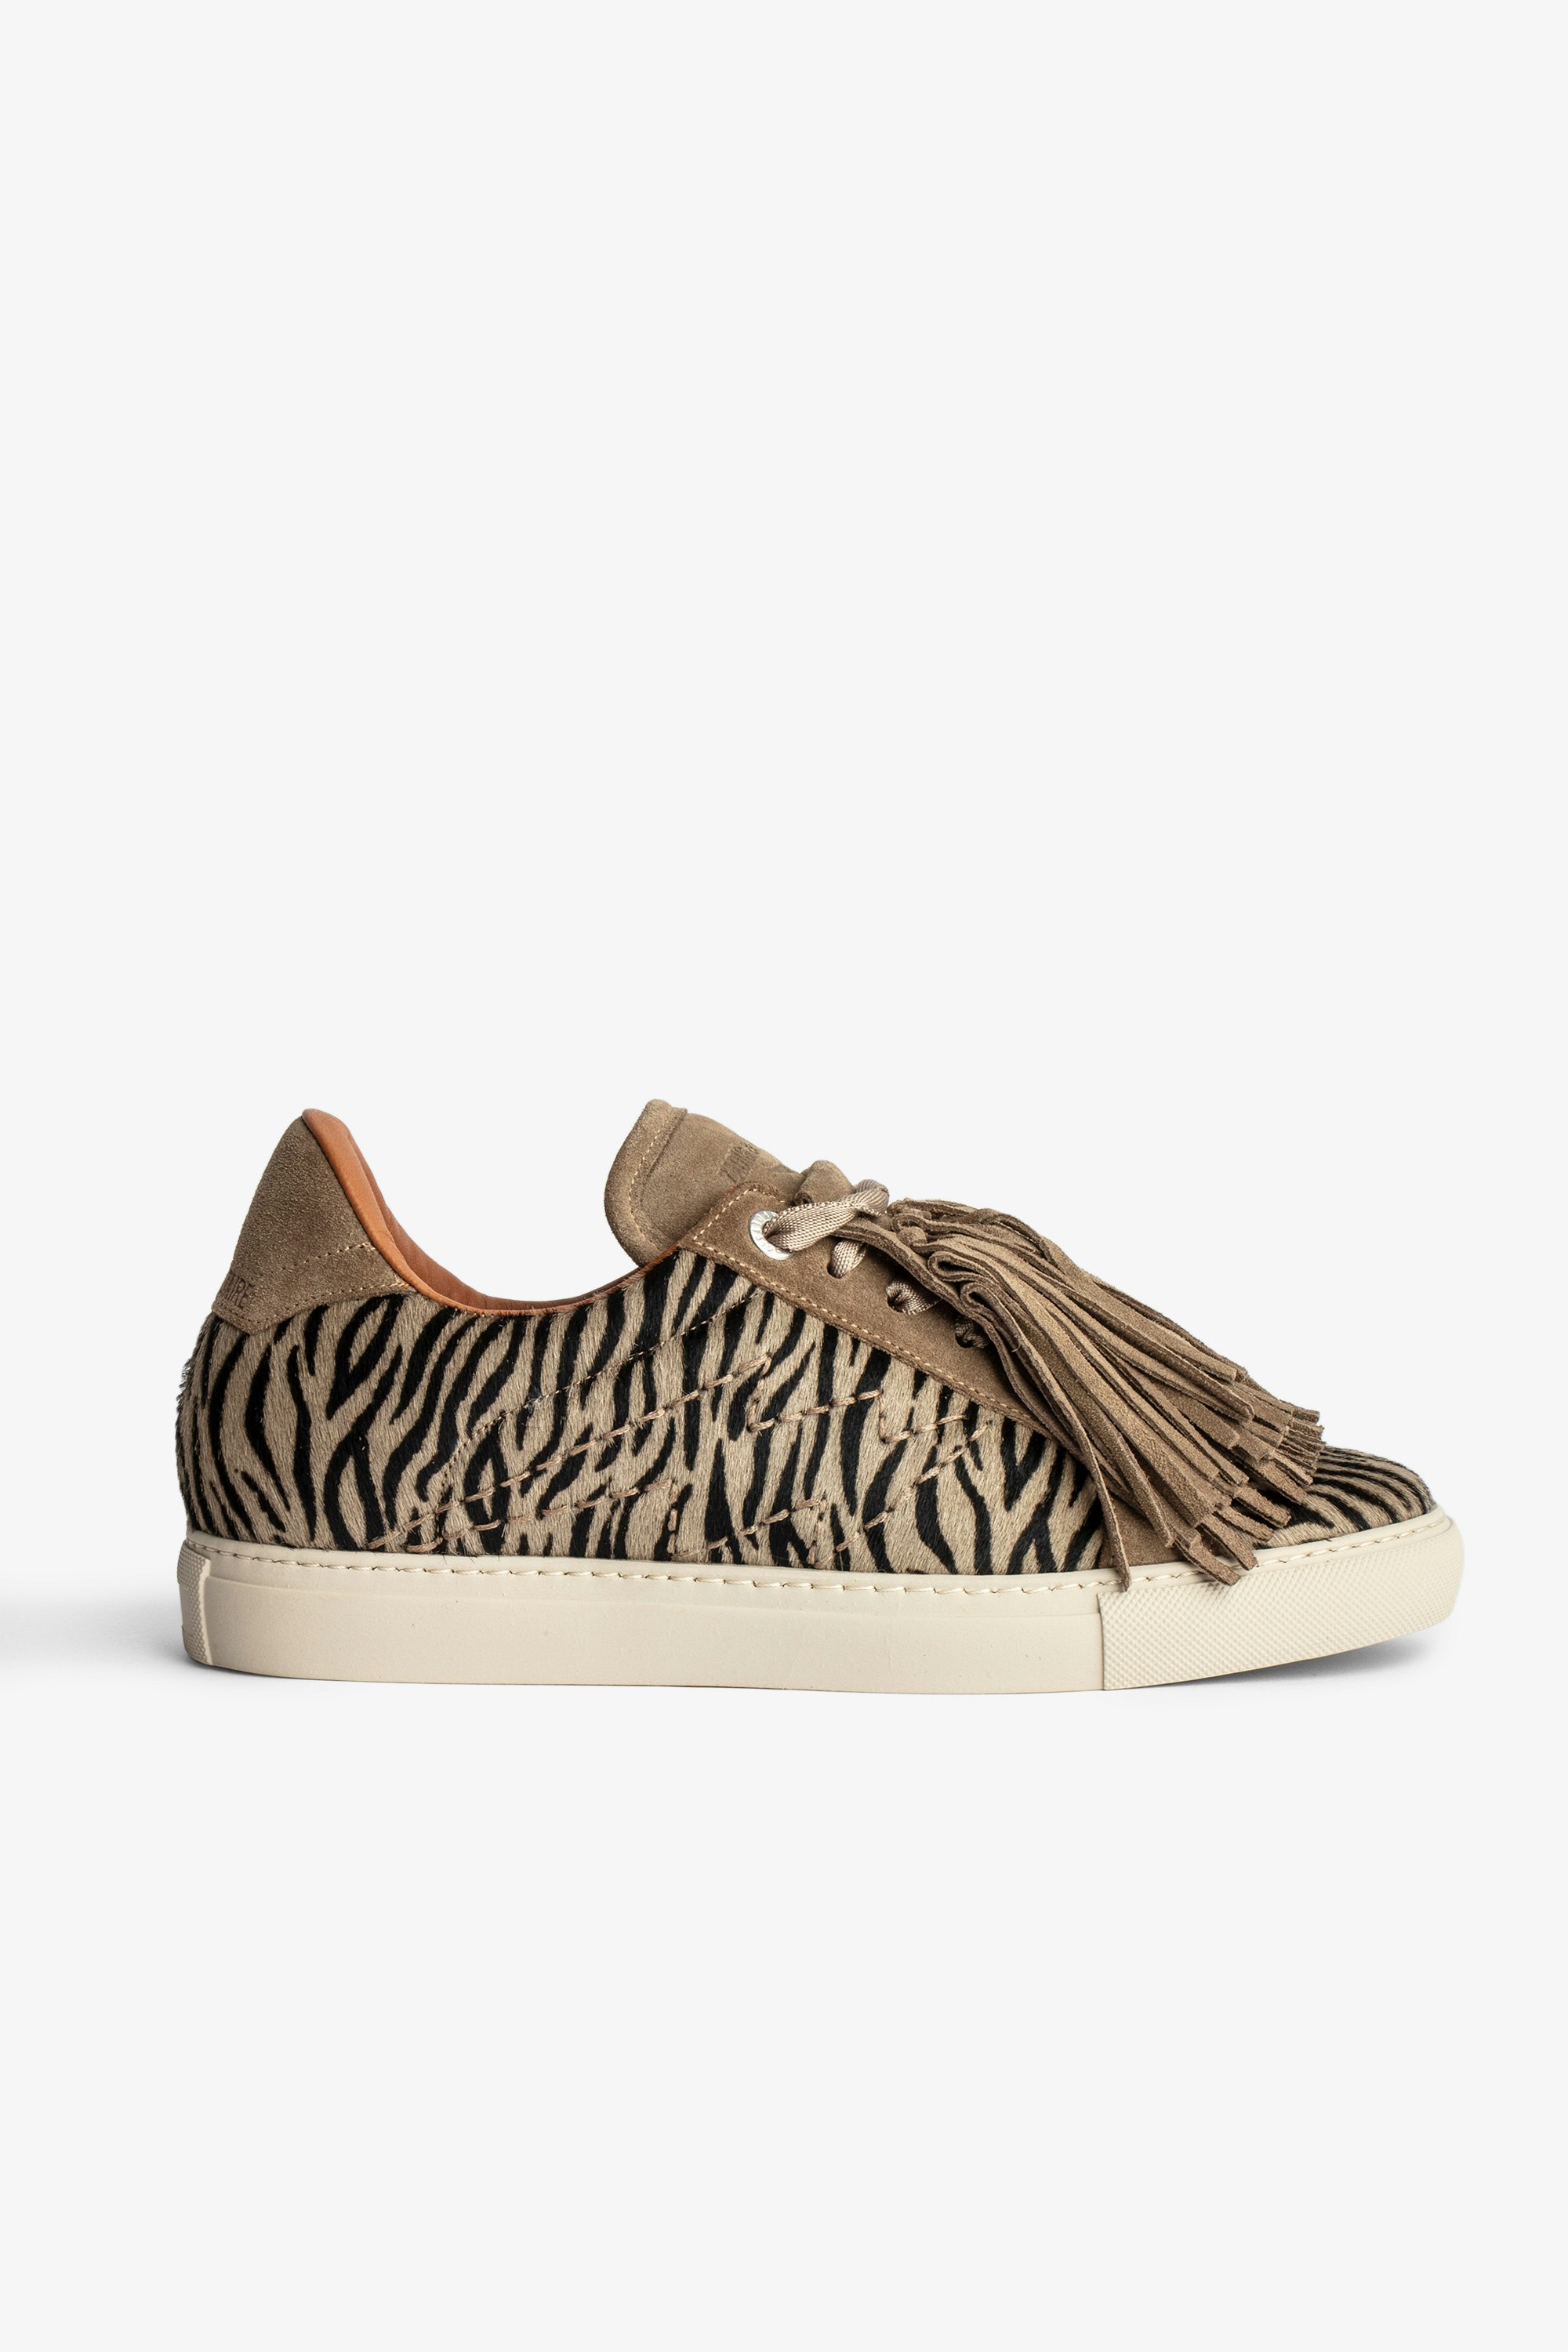 ZV1747 Sneakers Women’s taupe leather low-top sneakers with zebra print and fringing